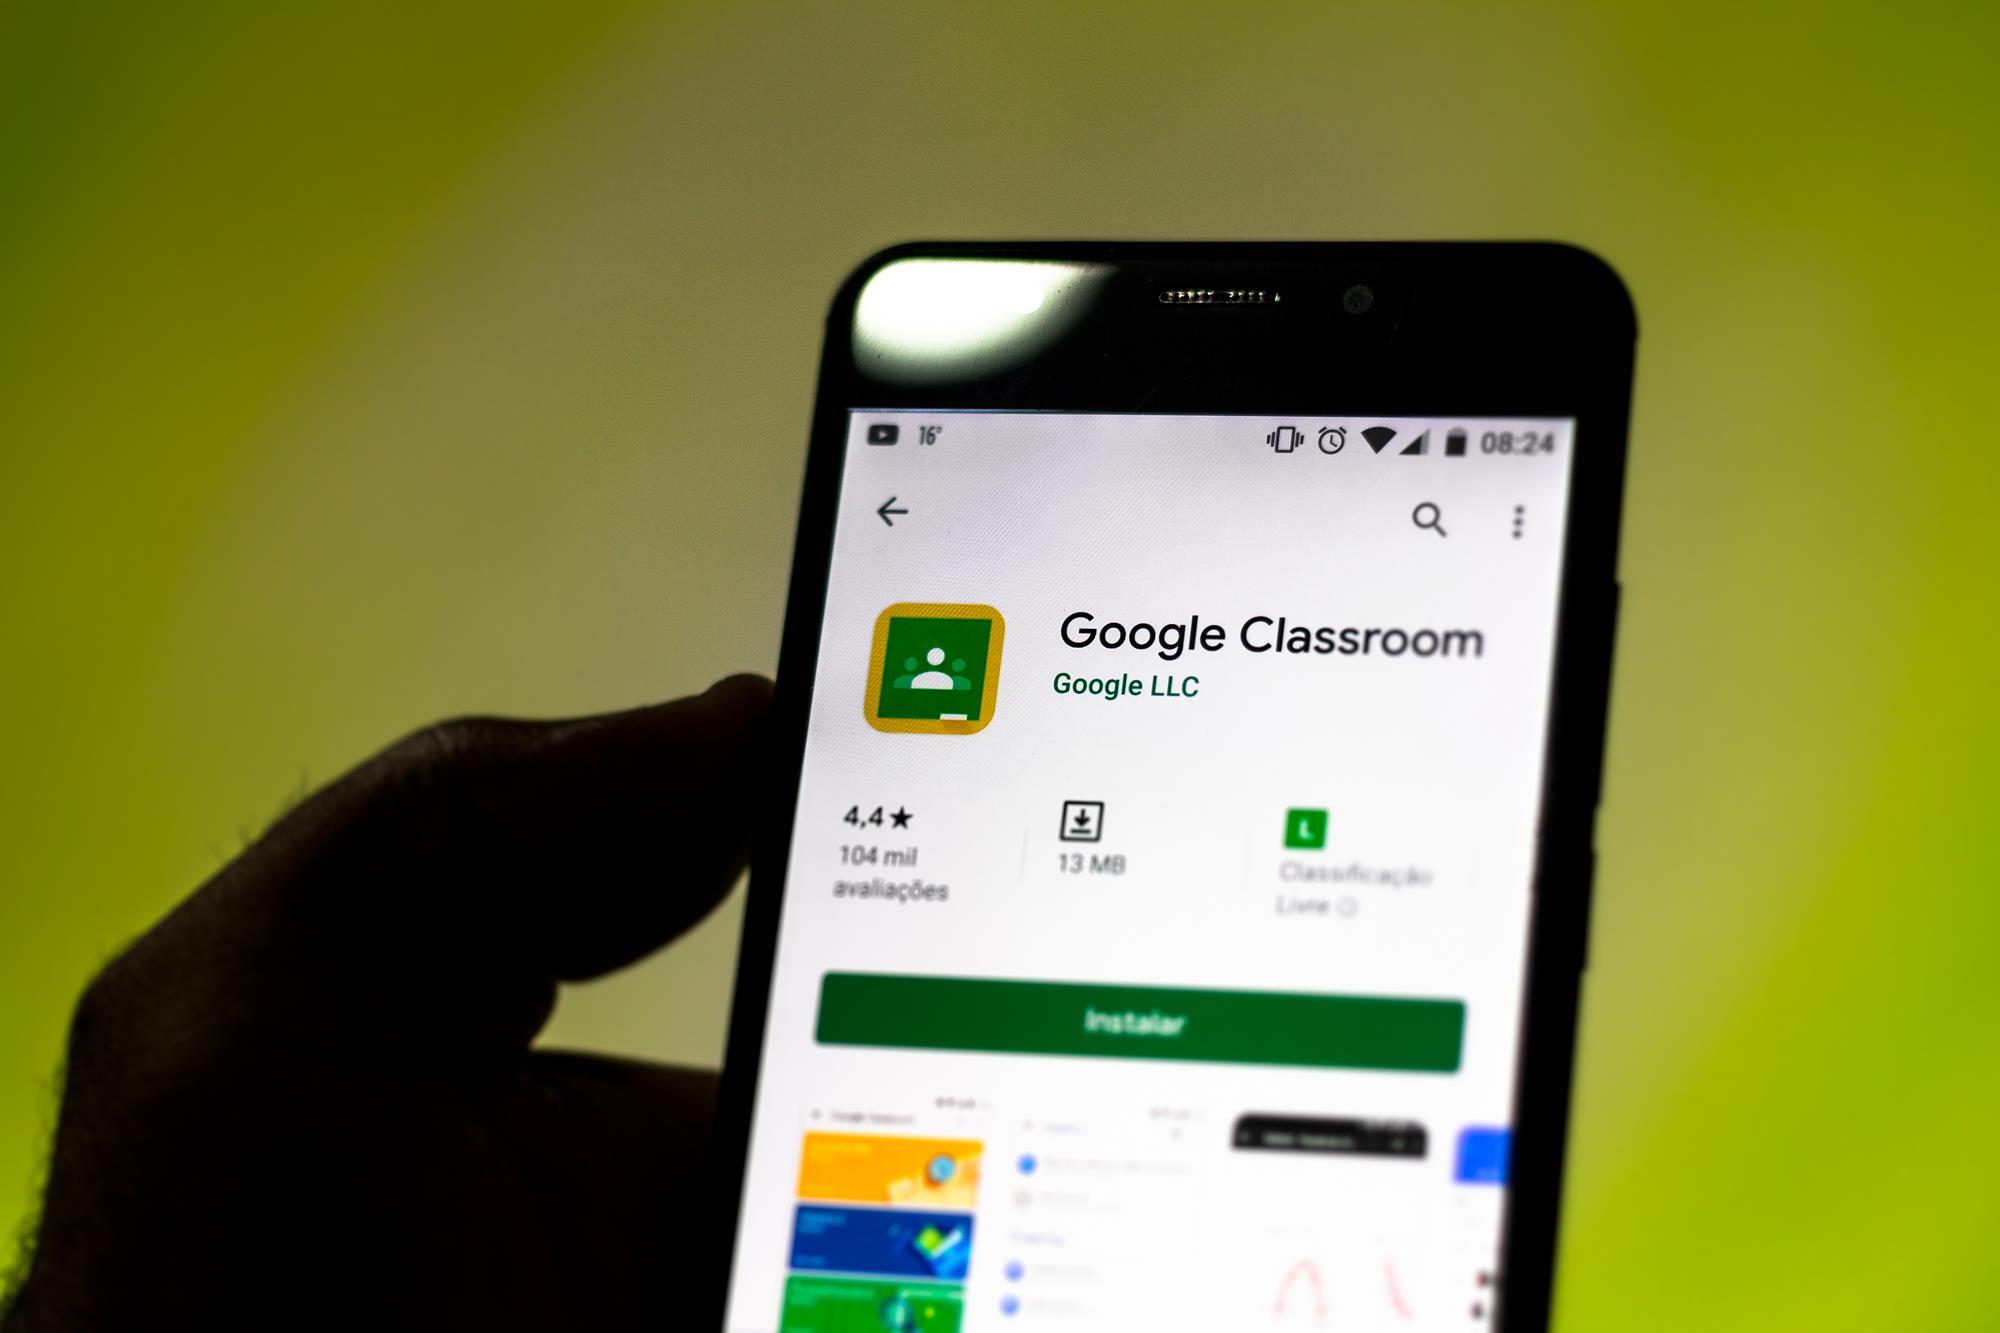 How To Join Google Classroom In Mobile